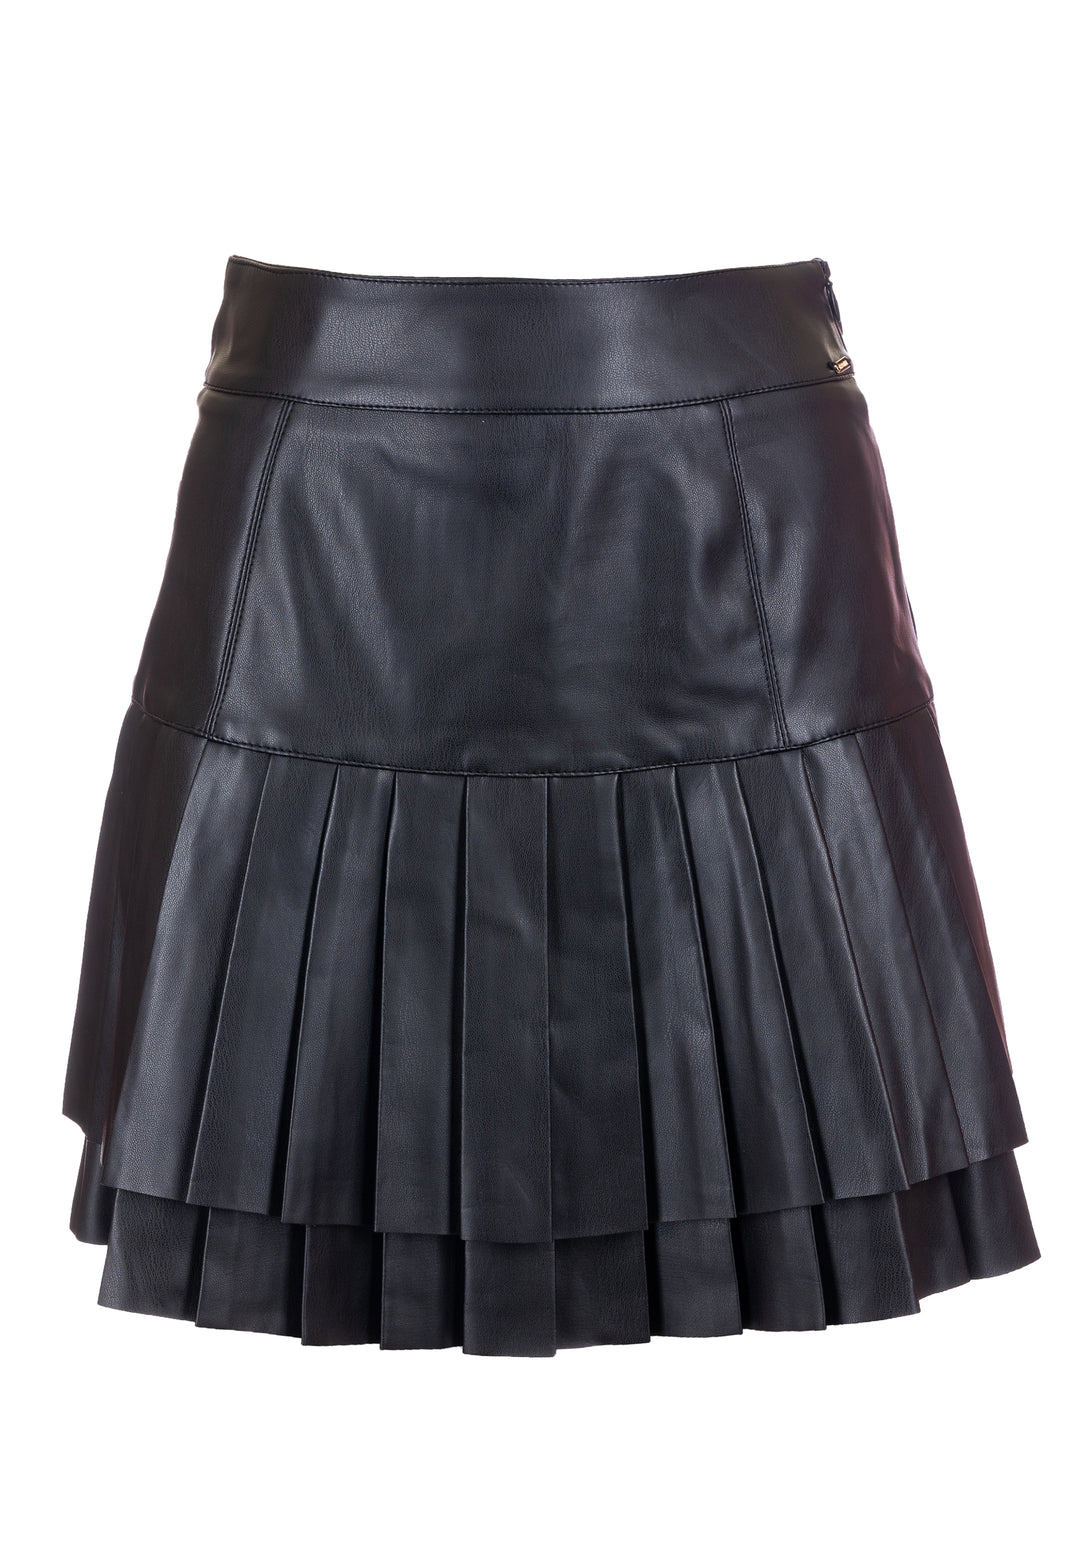 Mini skirt regular fit made in eco leather